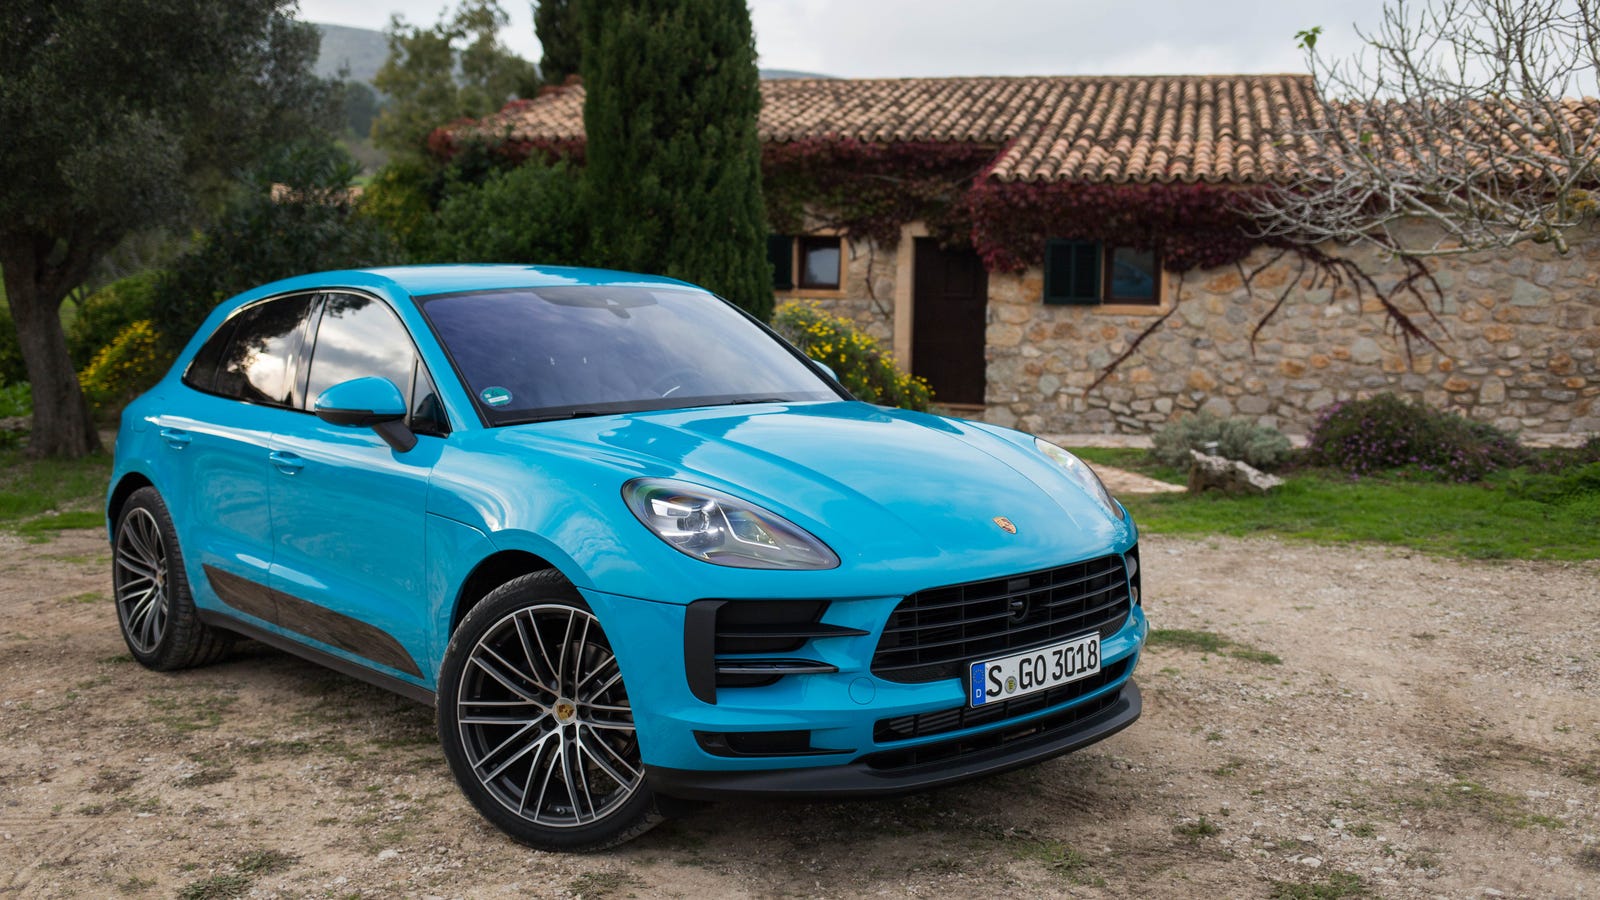 What Do You Want to Know About the 2019 Porsche Macan?